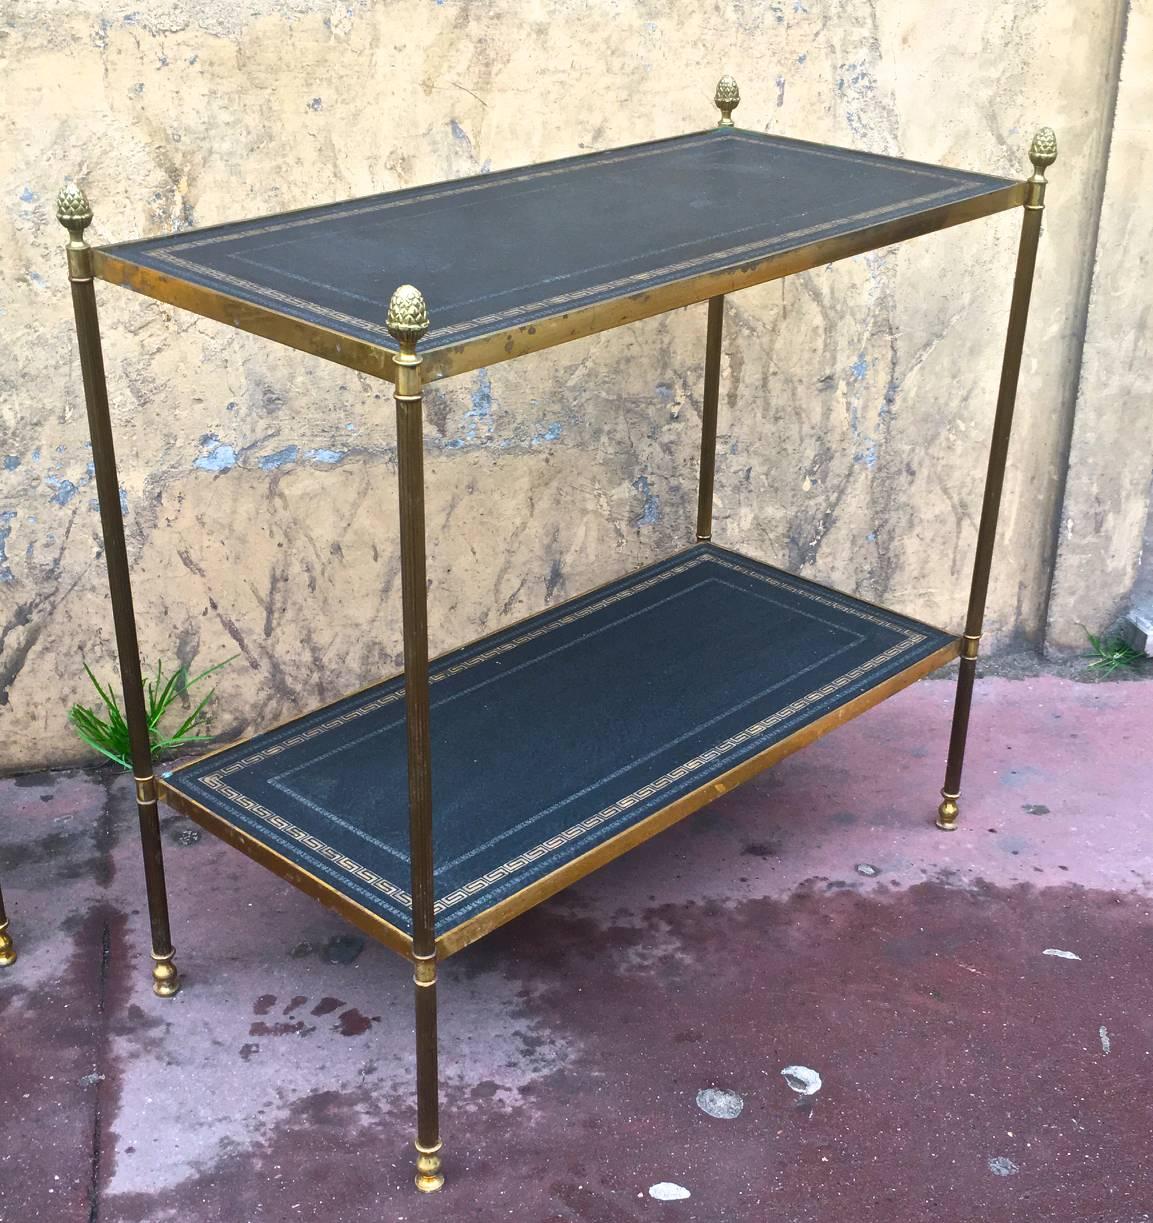 Maison Jansen pair of two-tier neoclassic side table with gold adorn leather top.